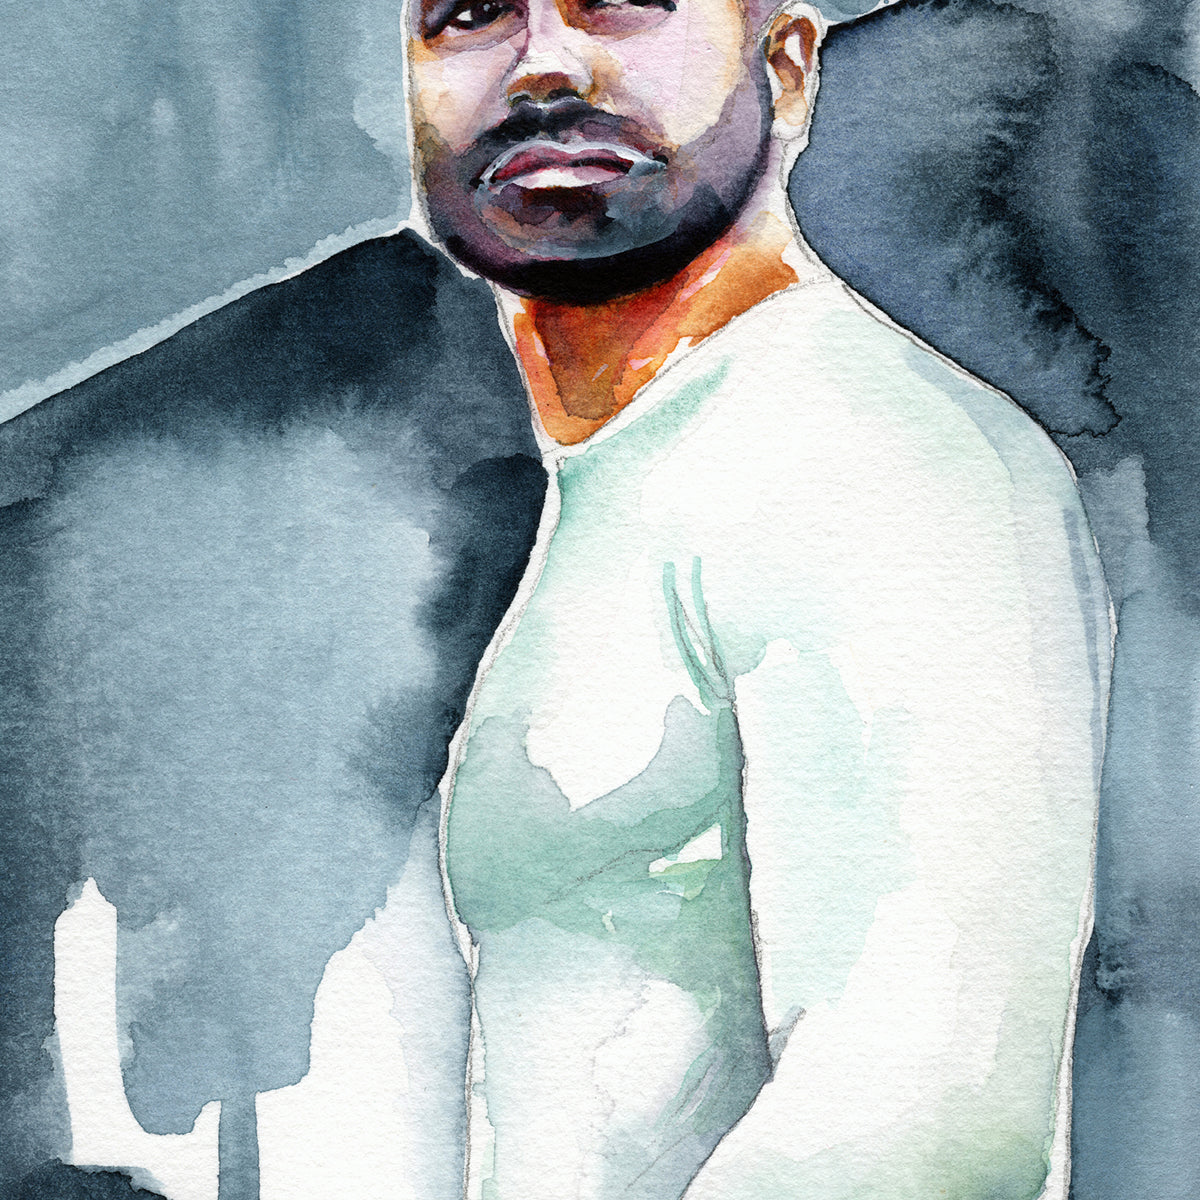 Urban Poise - Confident Bearded Man in Cool Hues - 6x9" Original Watercolor